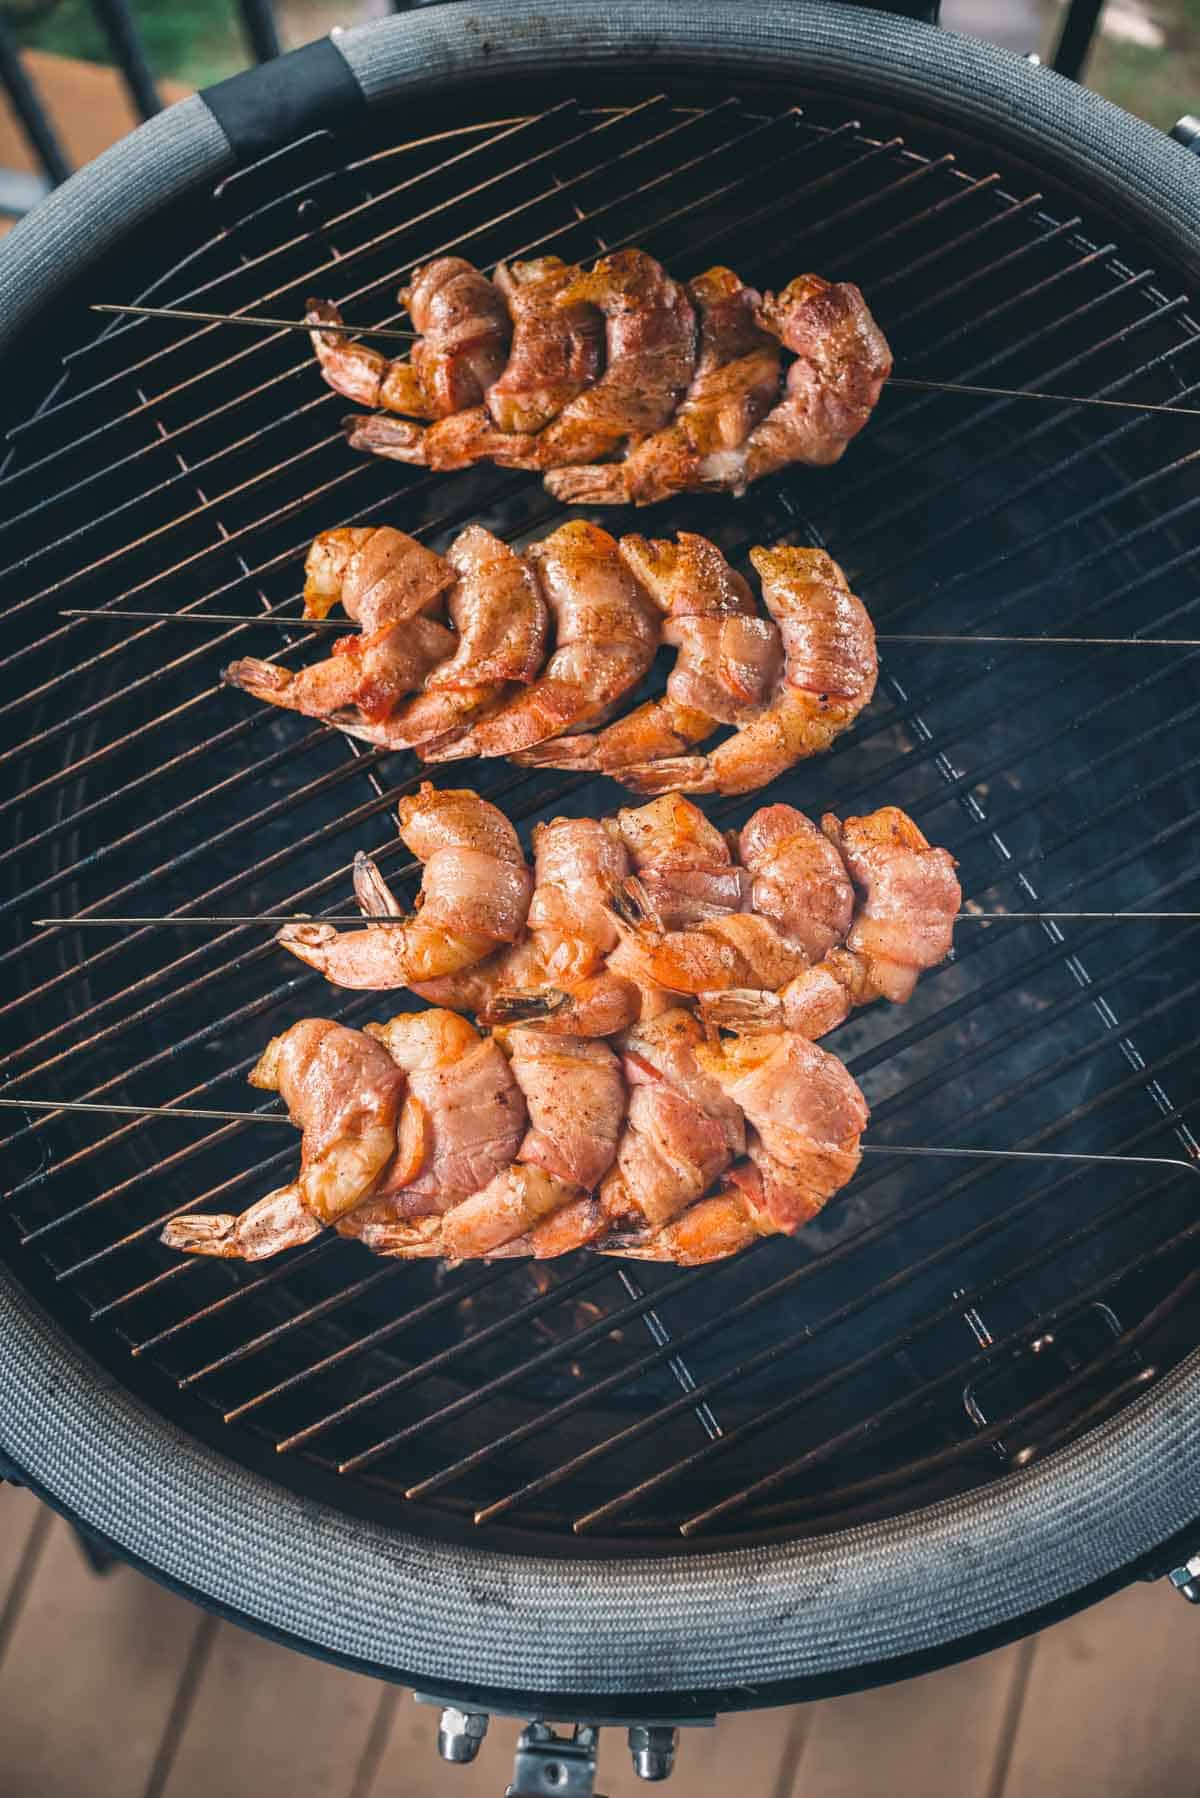 Three skewers of seasoned shrimp are grilling on a round barbecue grill.